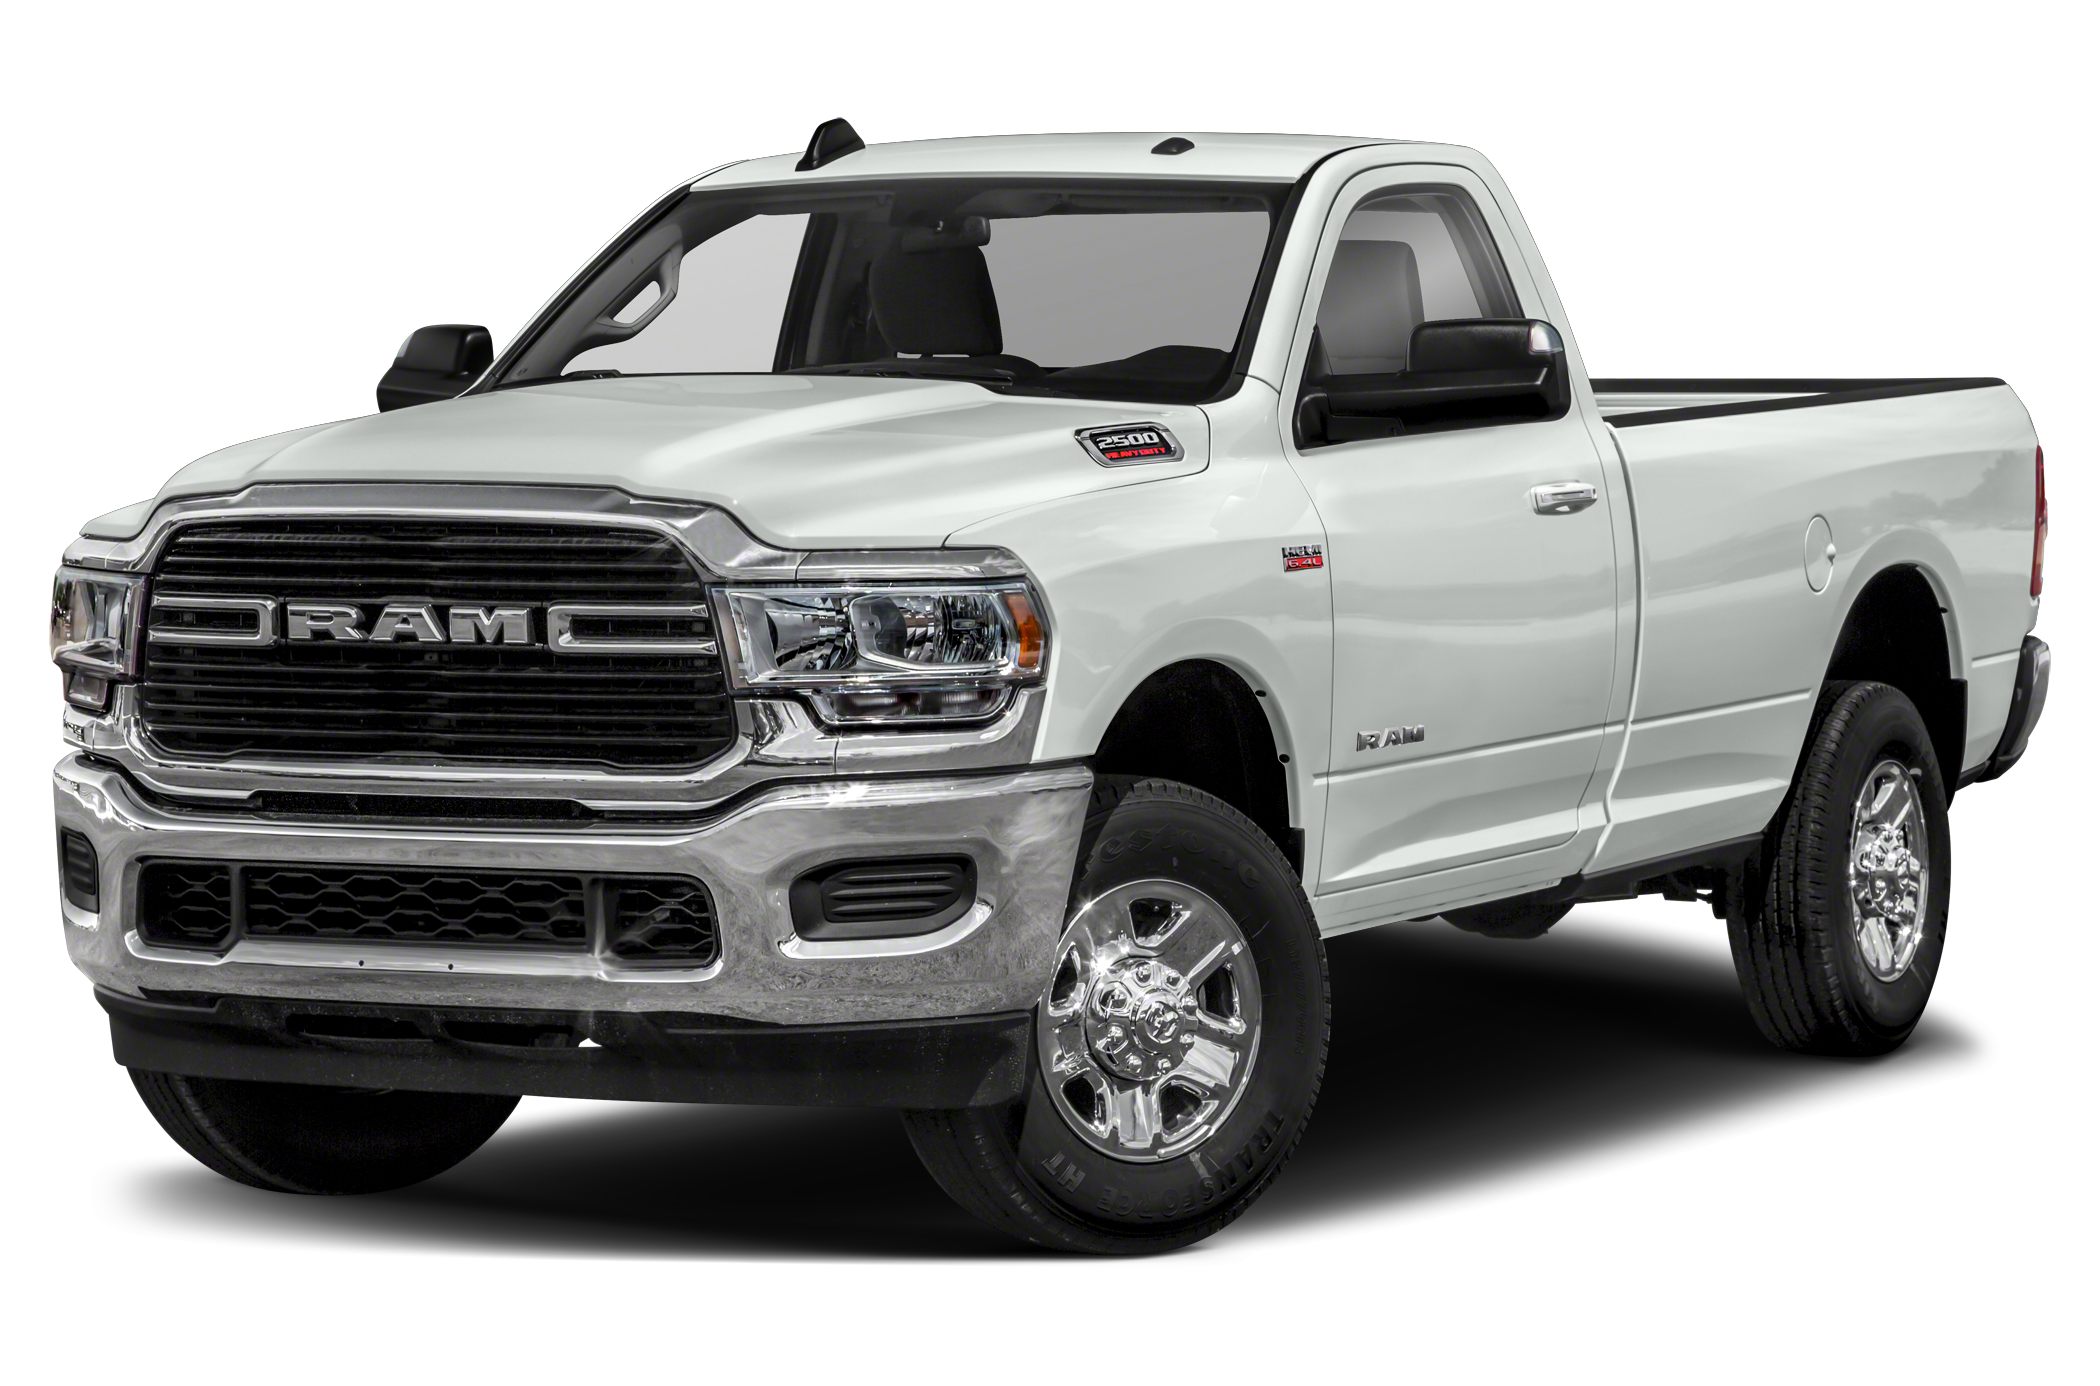 2019 Ram 2500 Specs And Prices